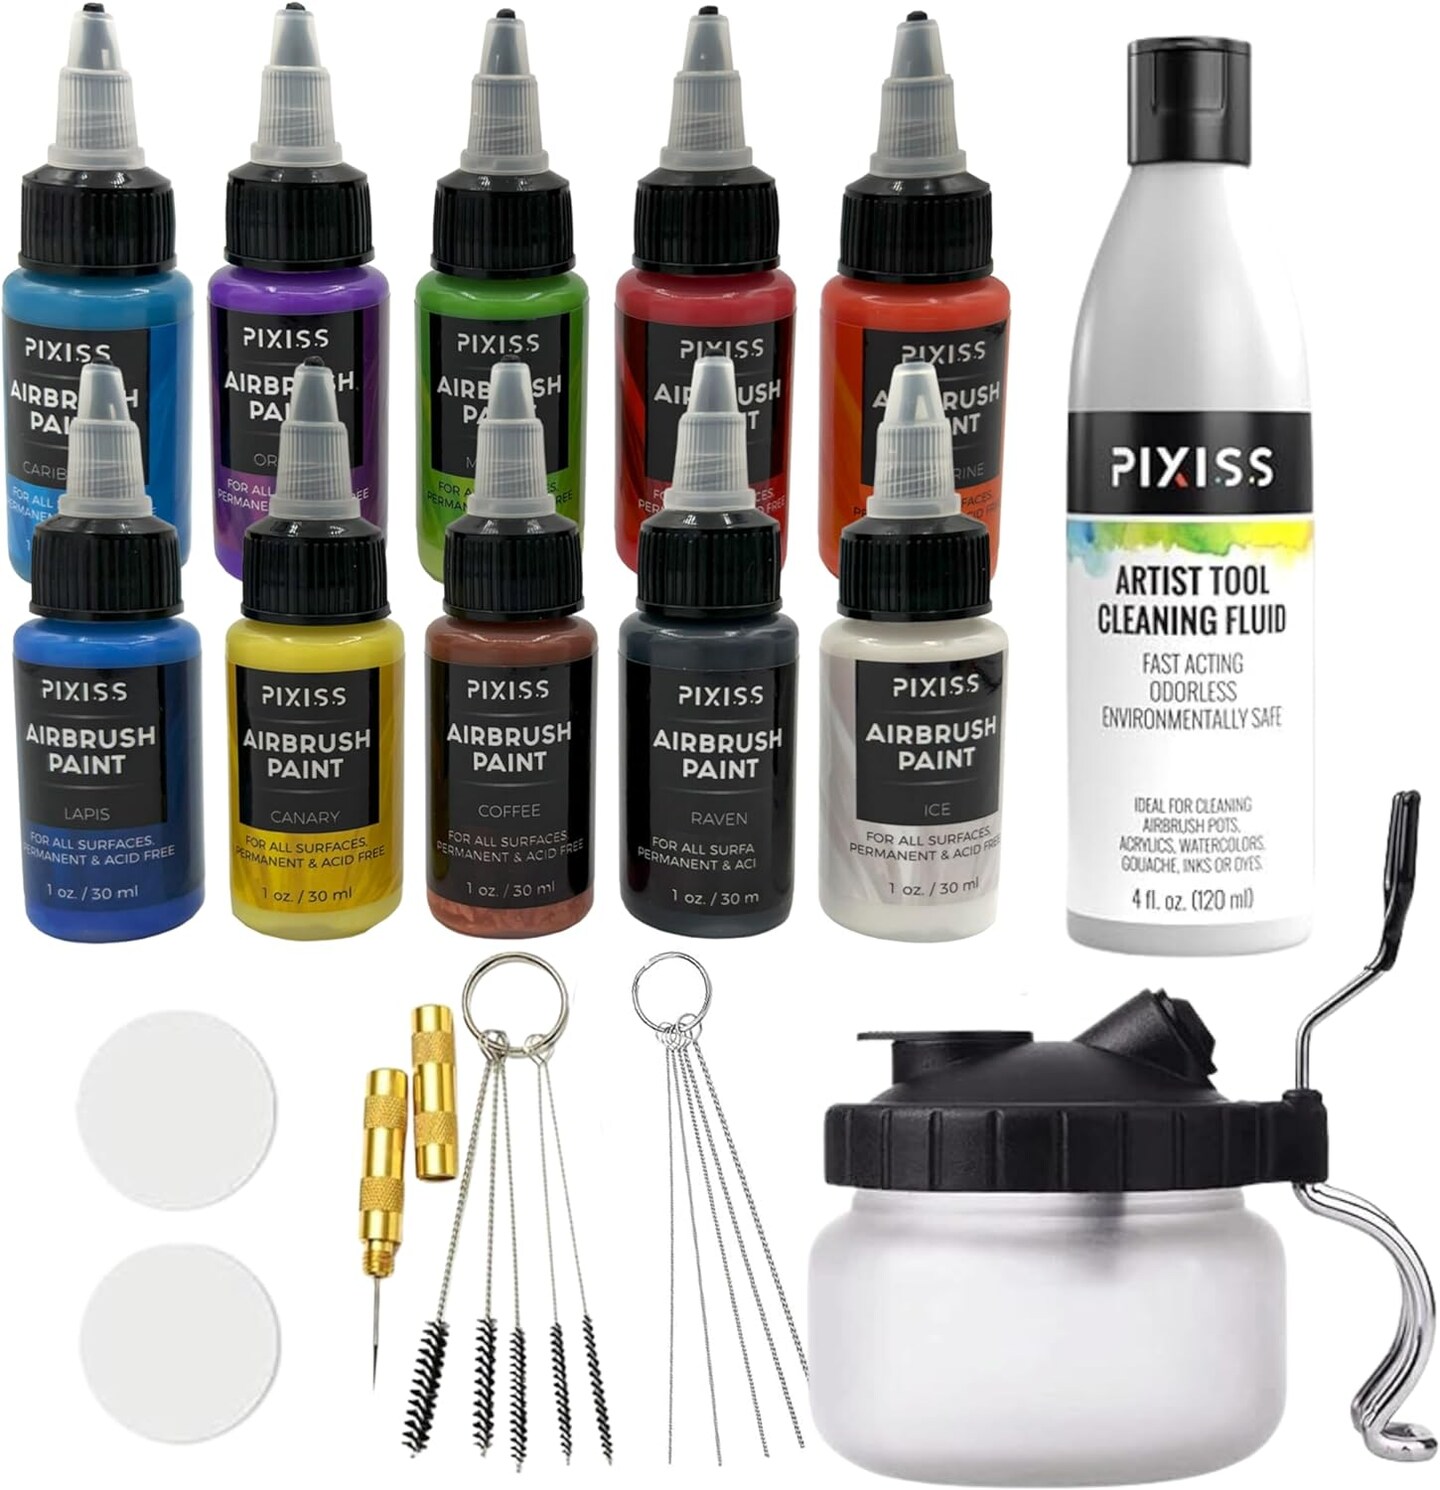 Airbrush Cleaning Kit with airbursh Cleaning Solution, Cleaning Pot